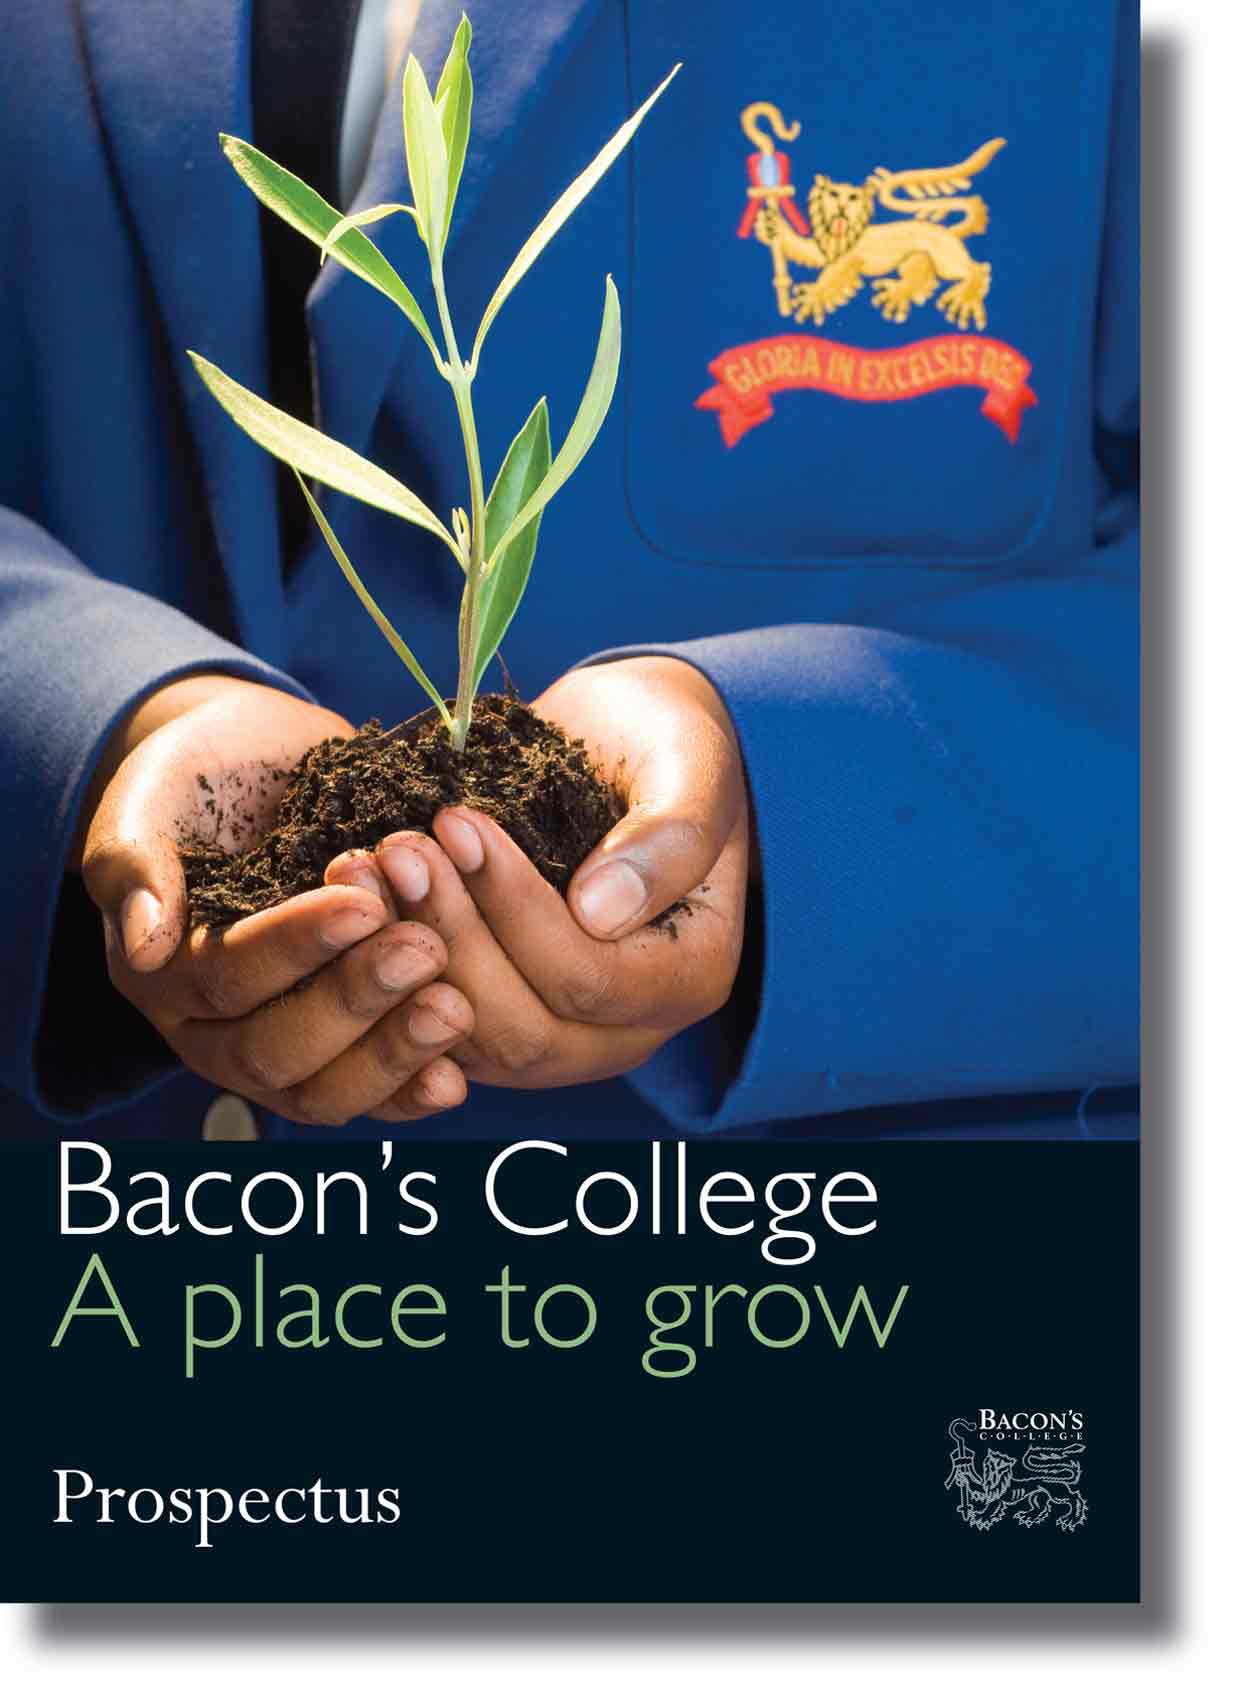 Bacon's College prospectus cover designed by ideology.uk.com